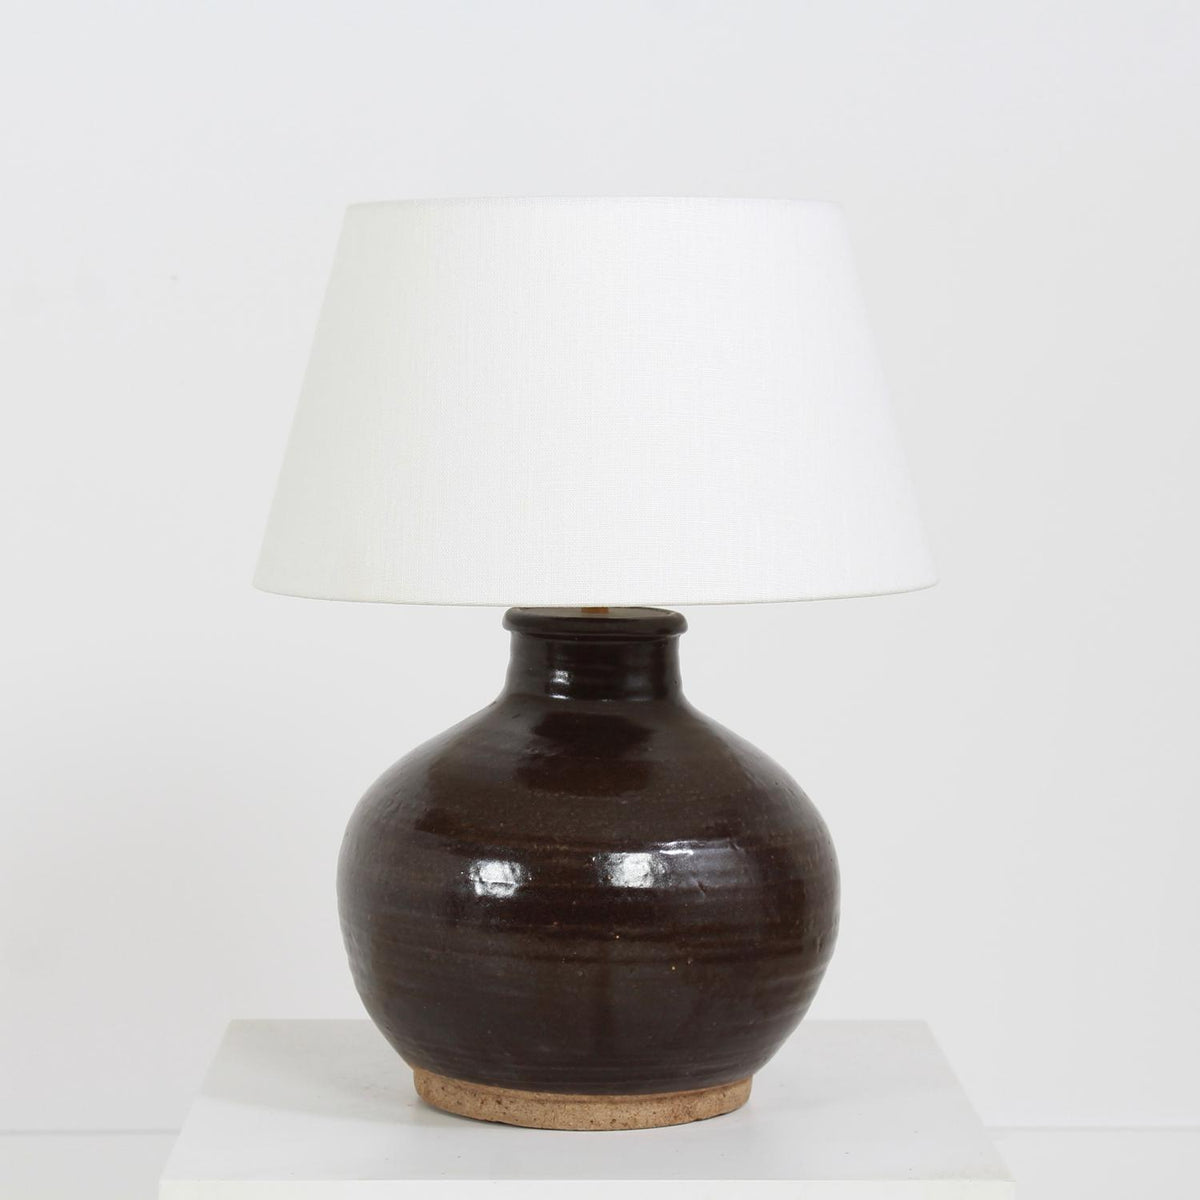 CHARMING ANTIQUE CHINESE STORAGE JAR TABLE LAMP & SHADE